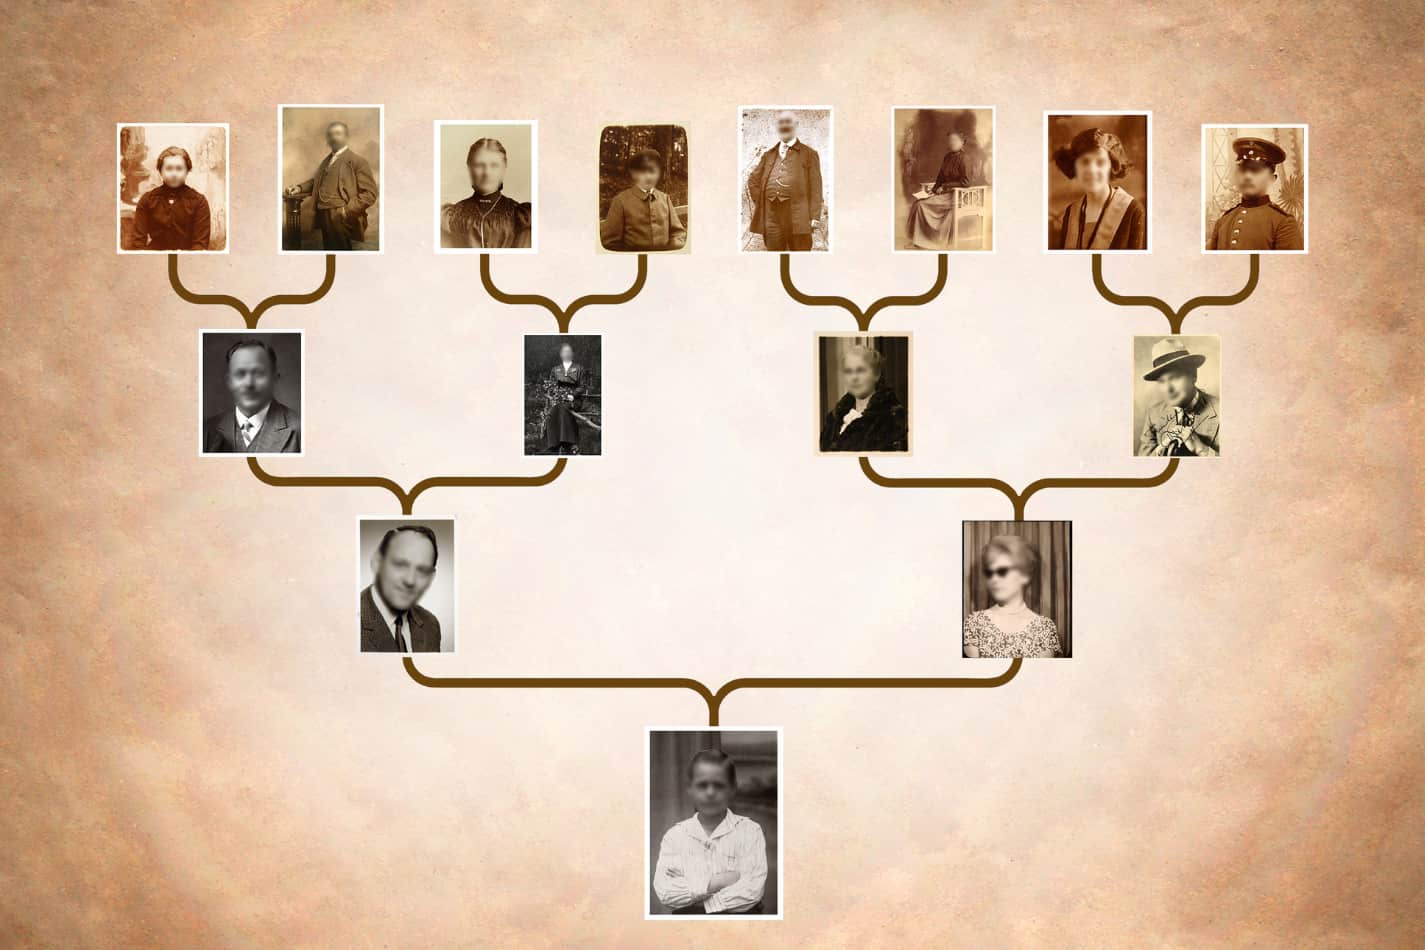 Image of genealogical tree of family with photos